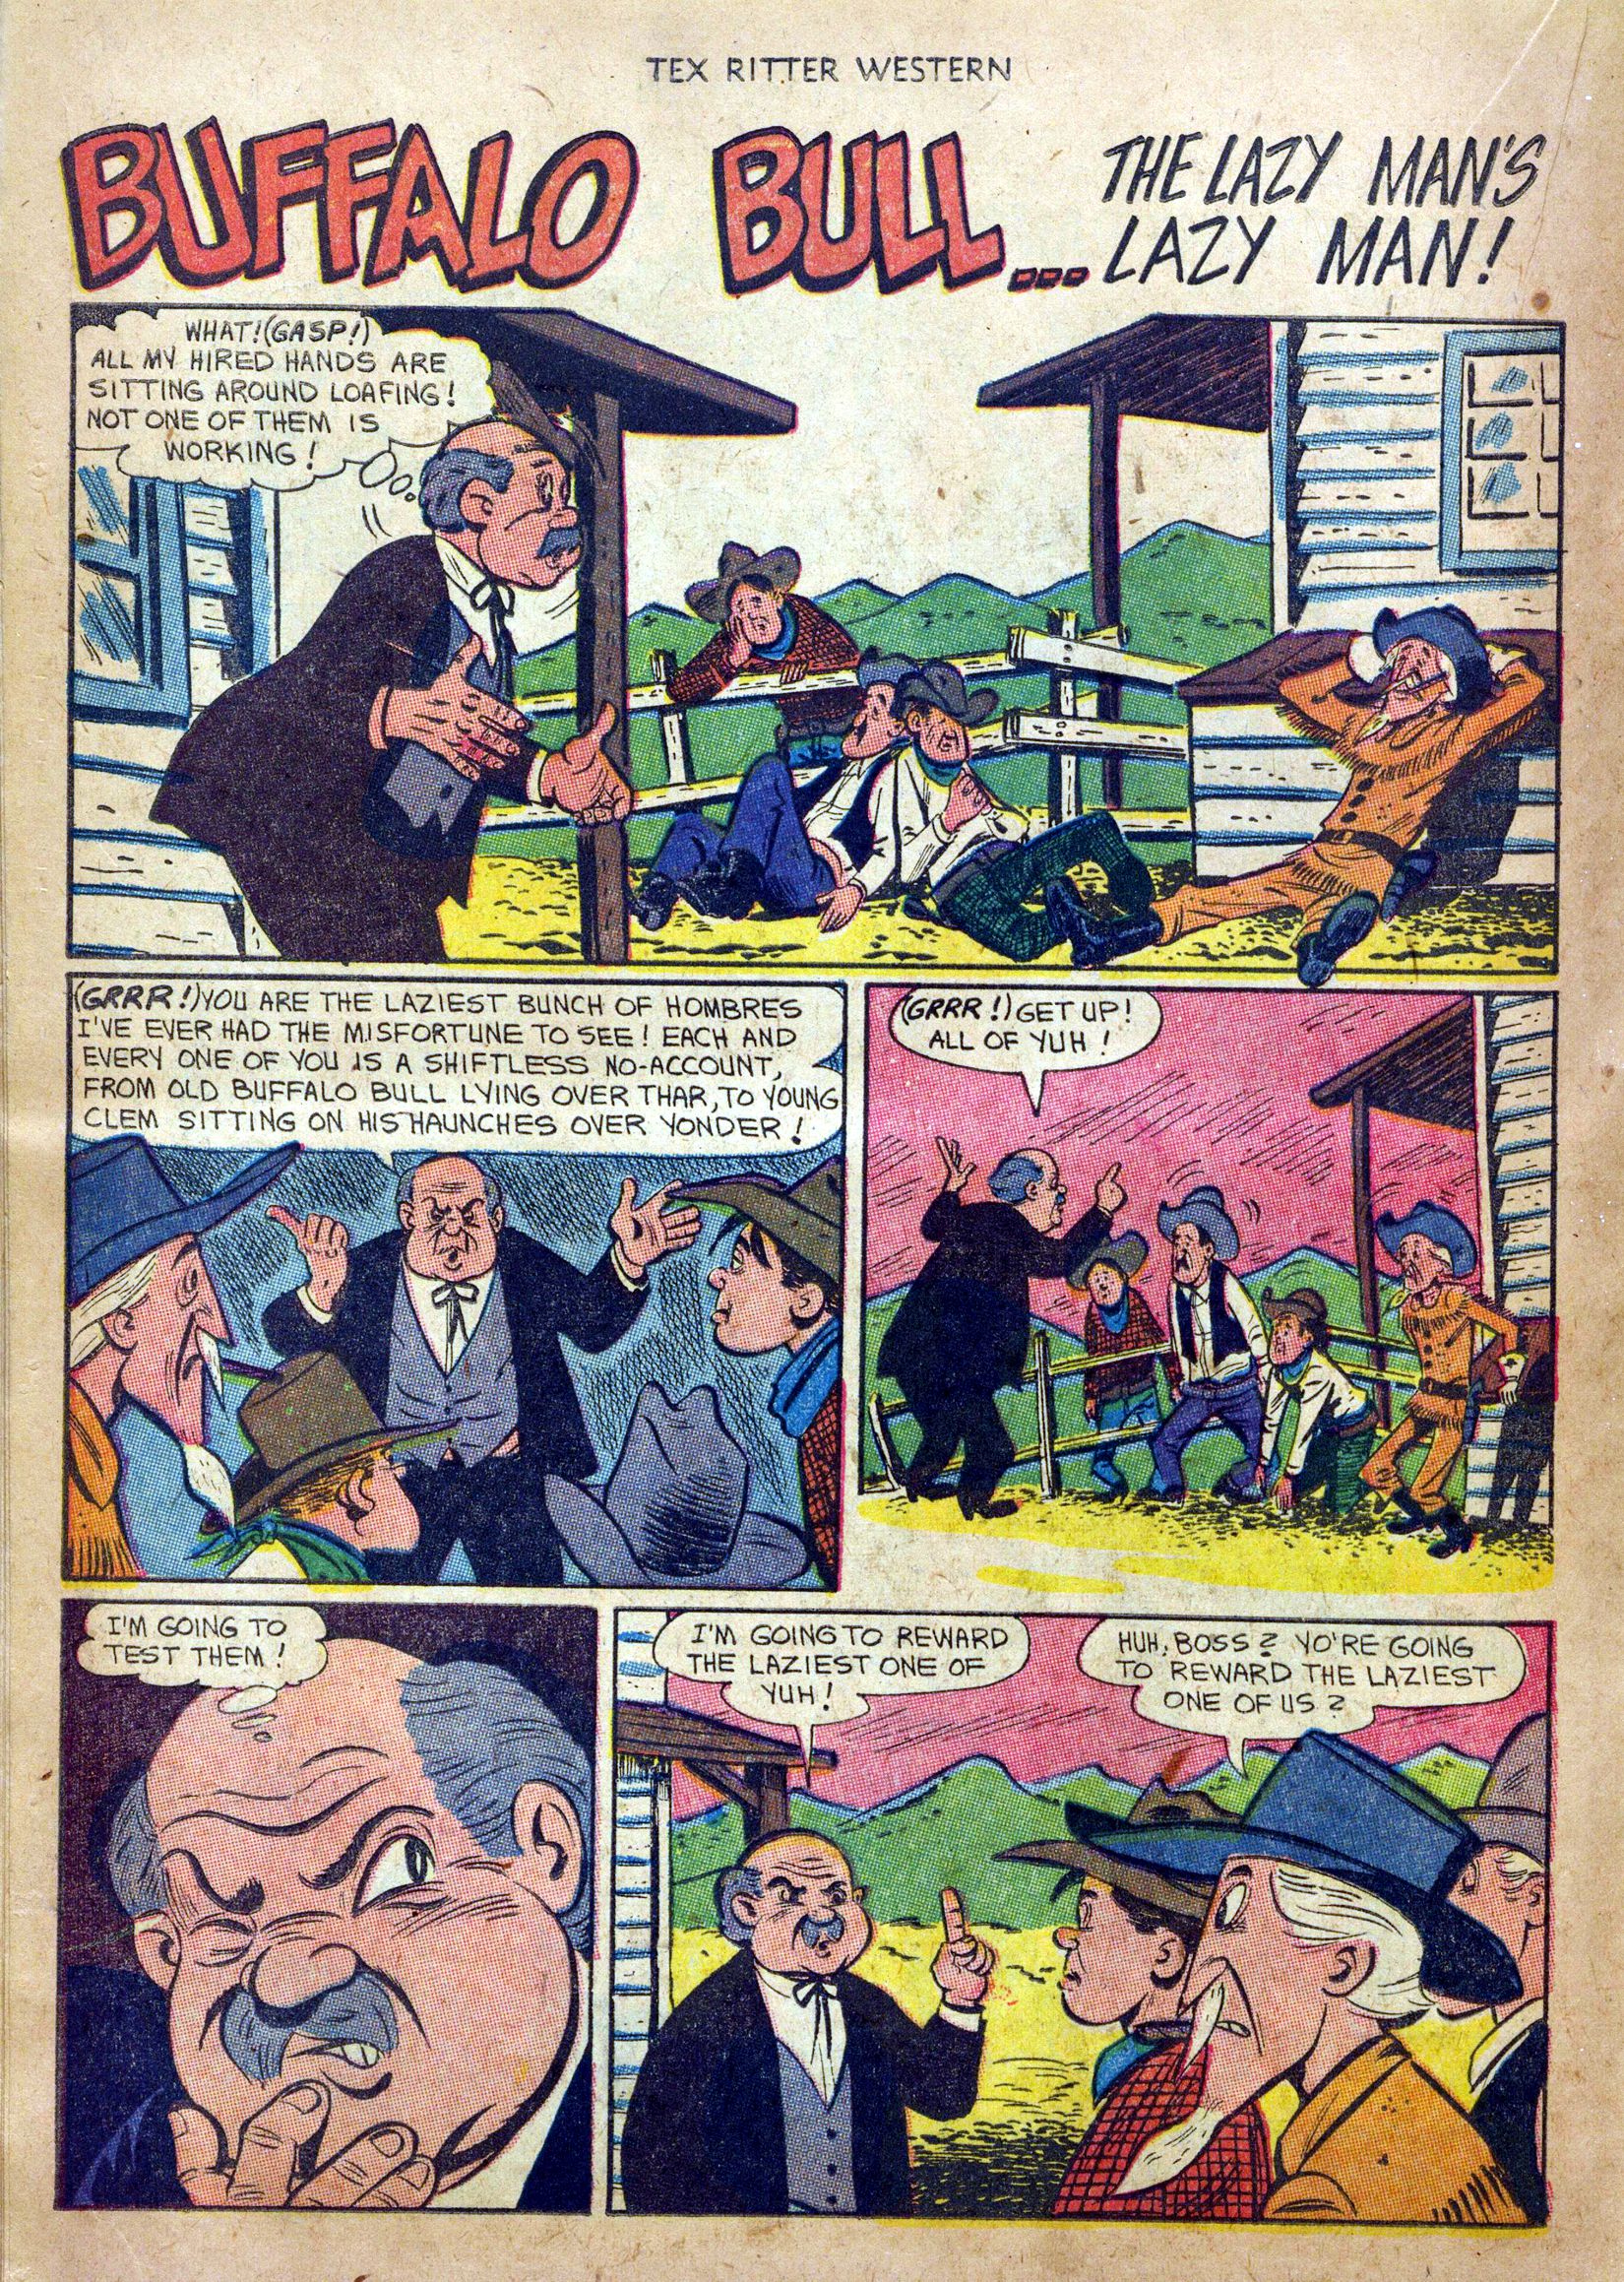 Read online Tex Ritter Western comic -  Issue #20 - 18